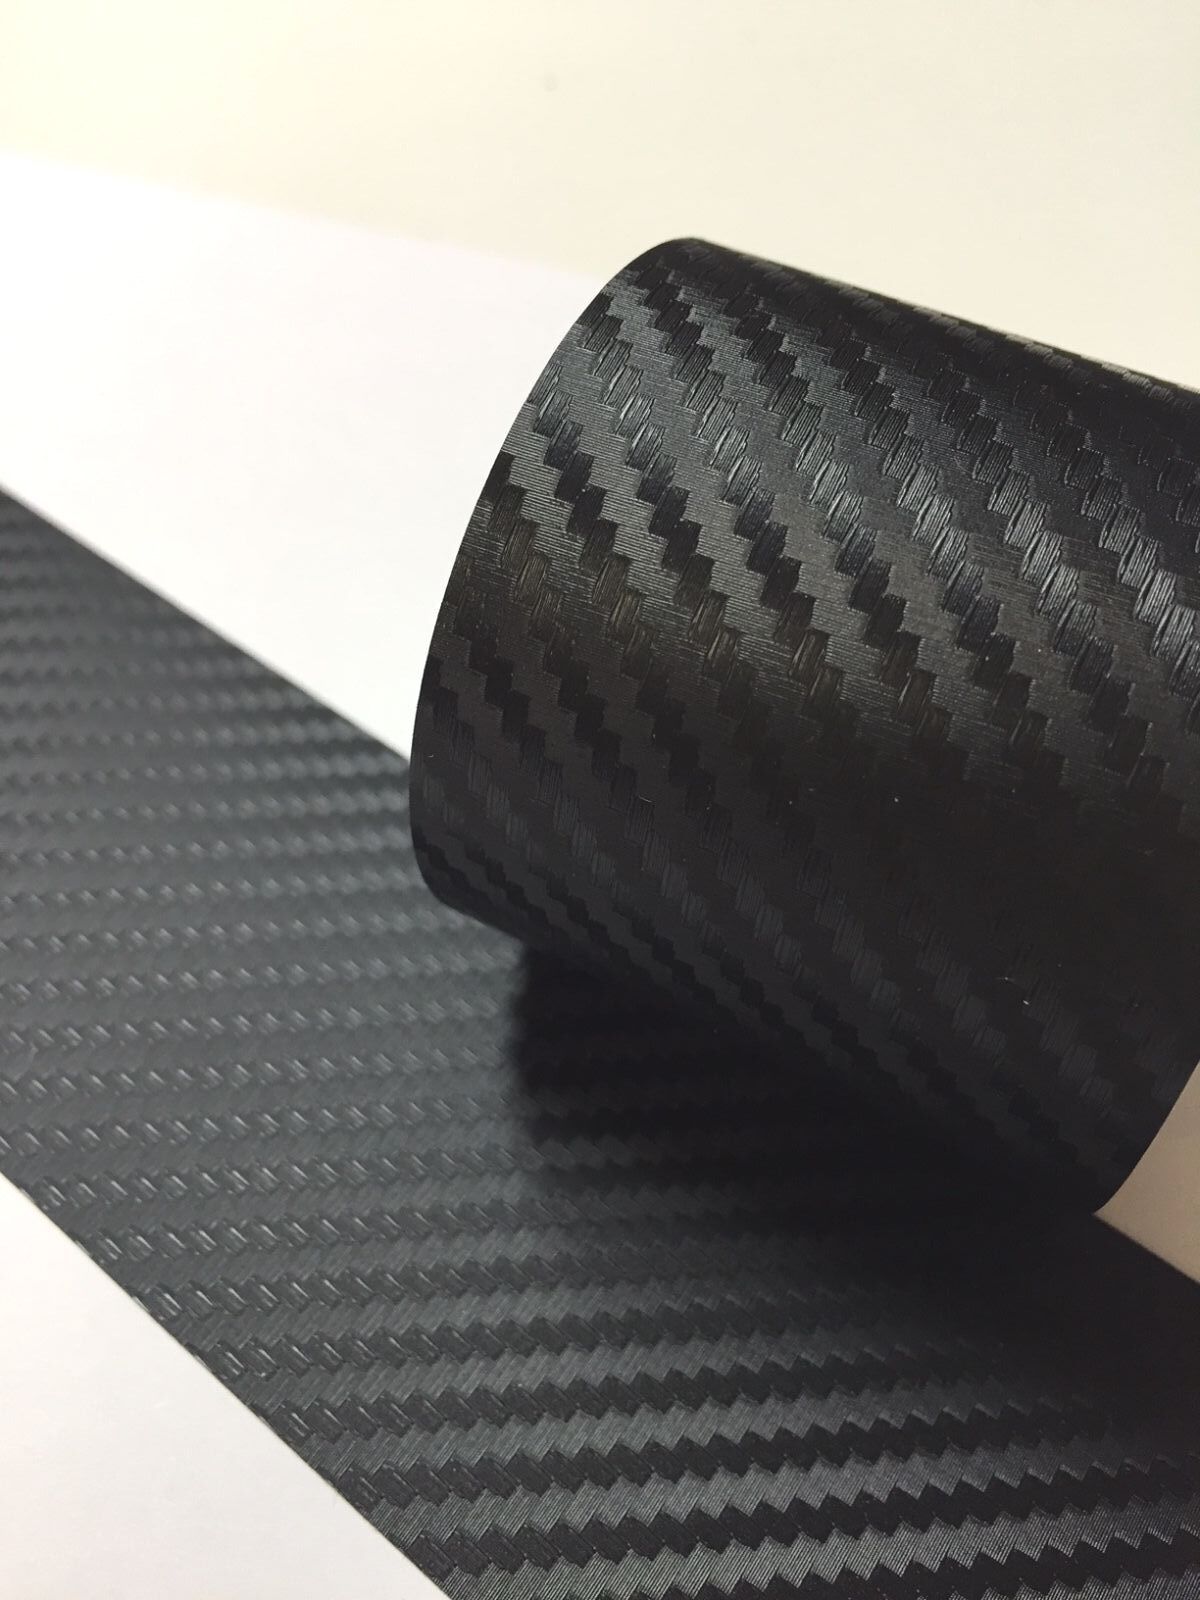 NEW Textured Carbon Fiber Tape, Flexible 6mil Thick, Automotive Grade Quality PSP Does Not Apply - фотография #3